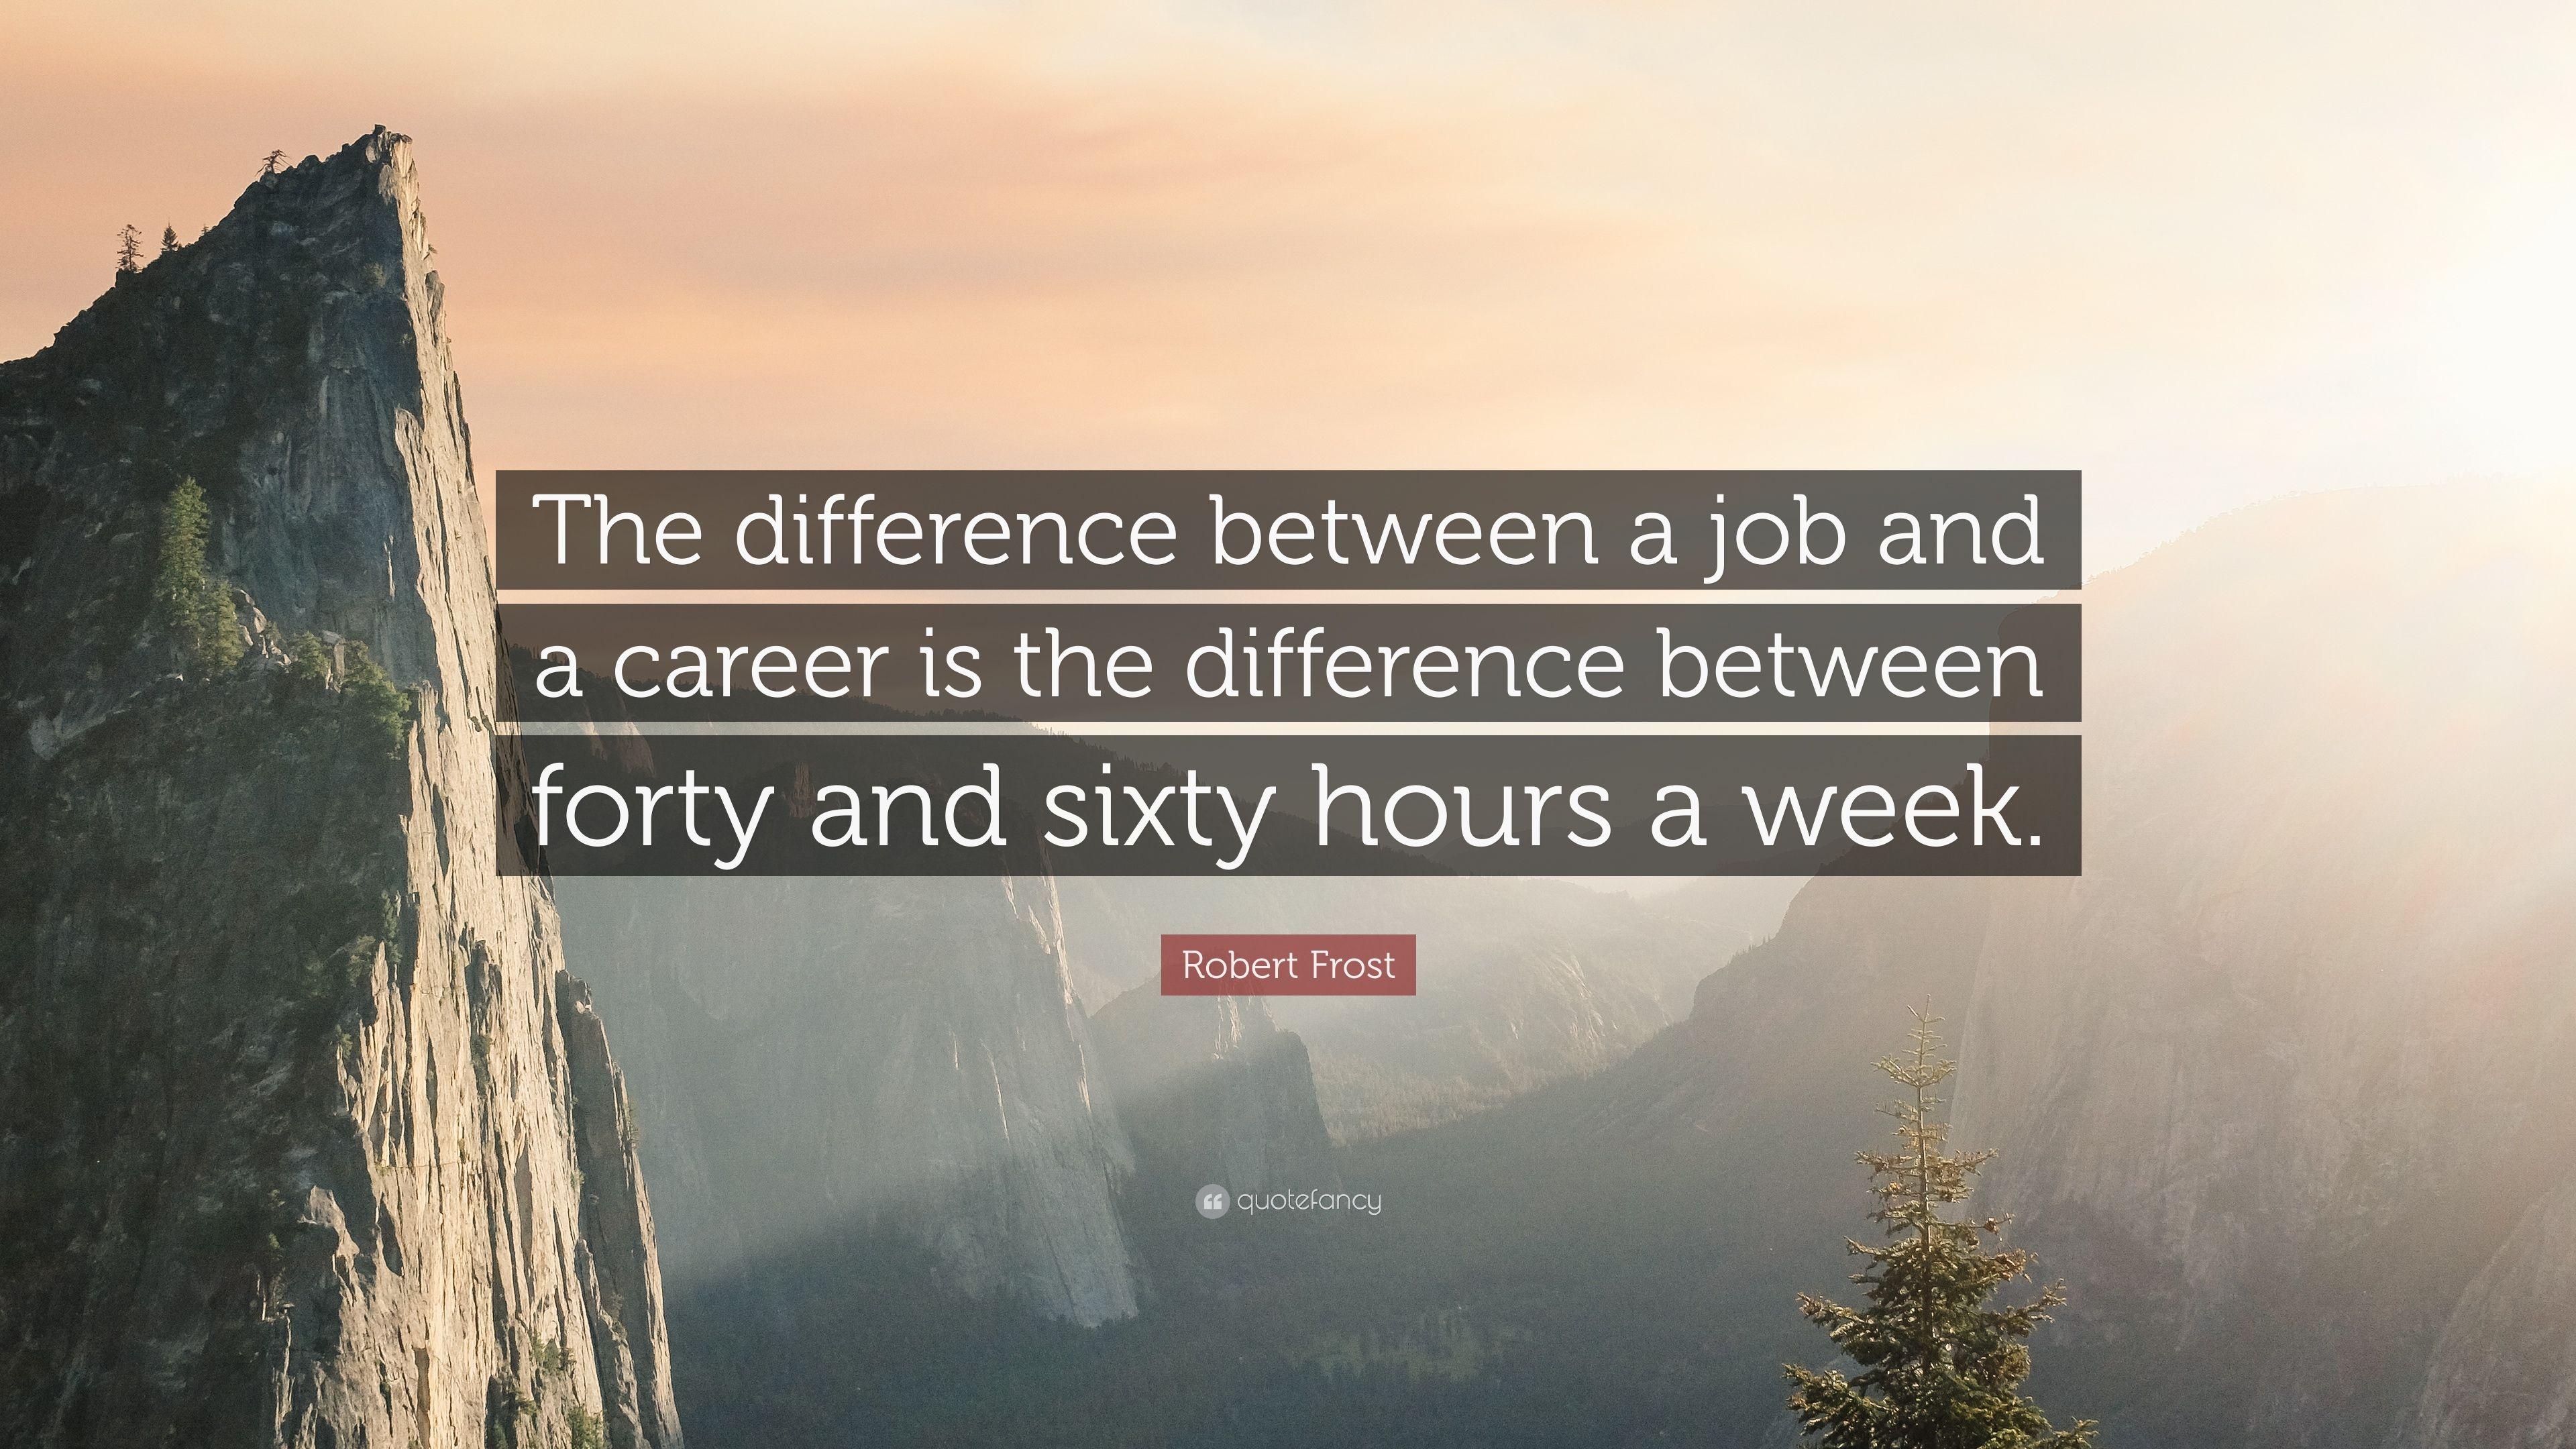 Robert Frost Quote: “The difference between a job and a career is